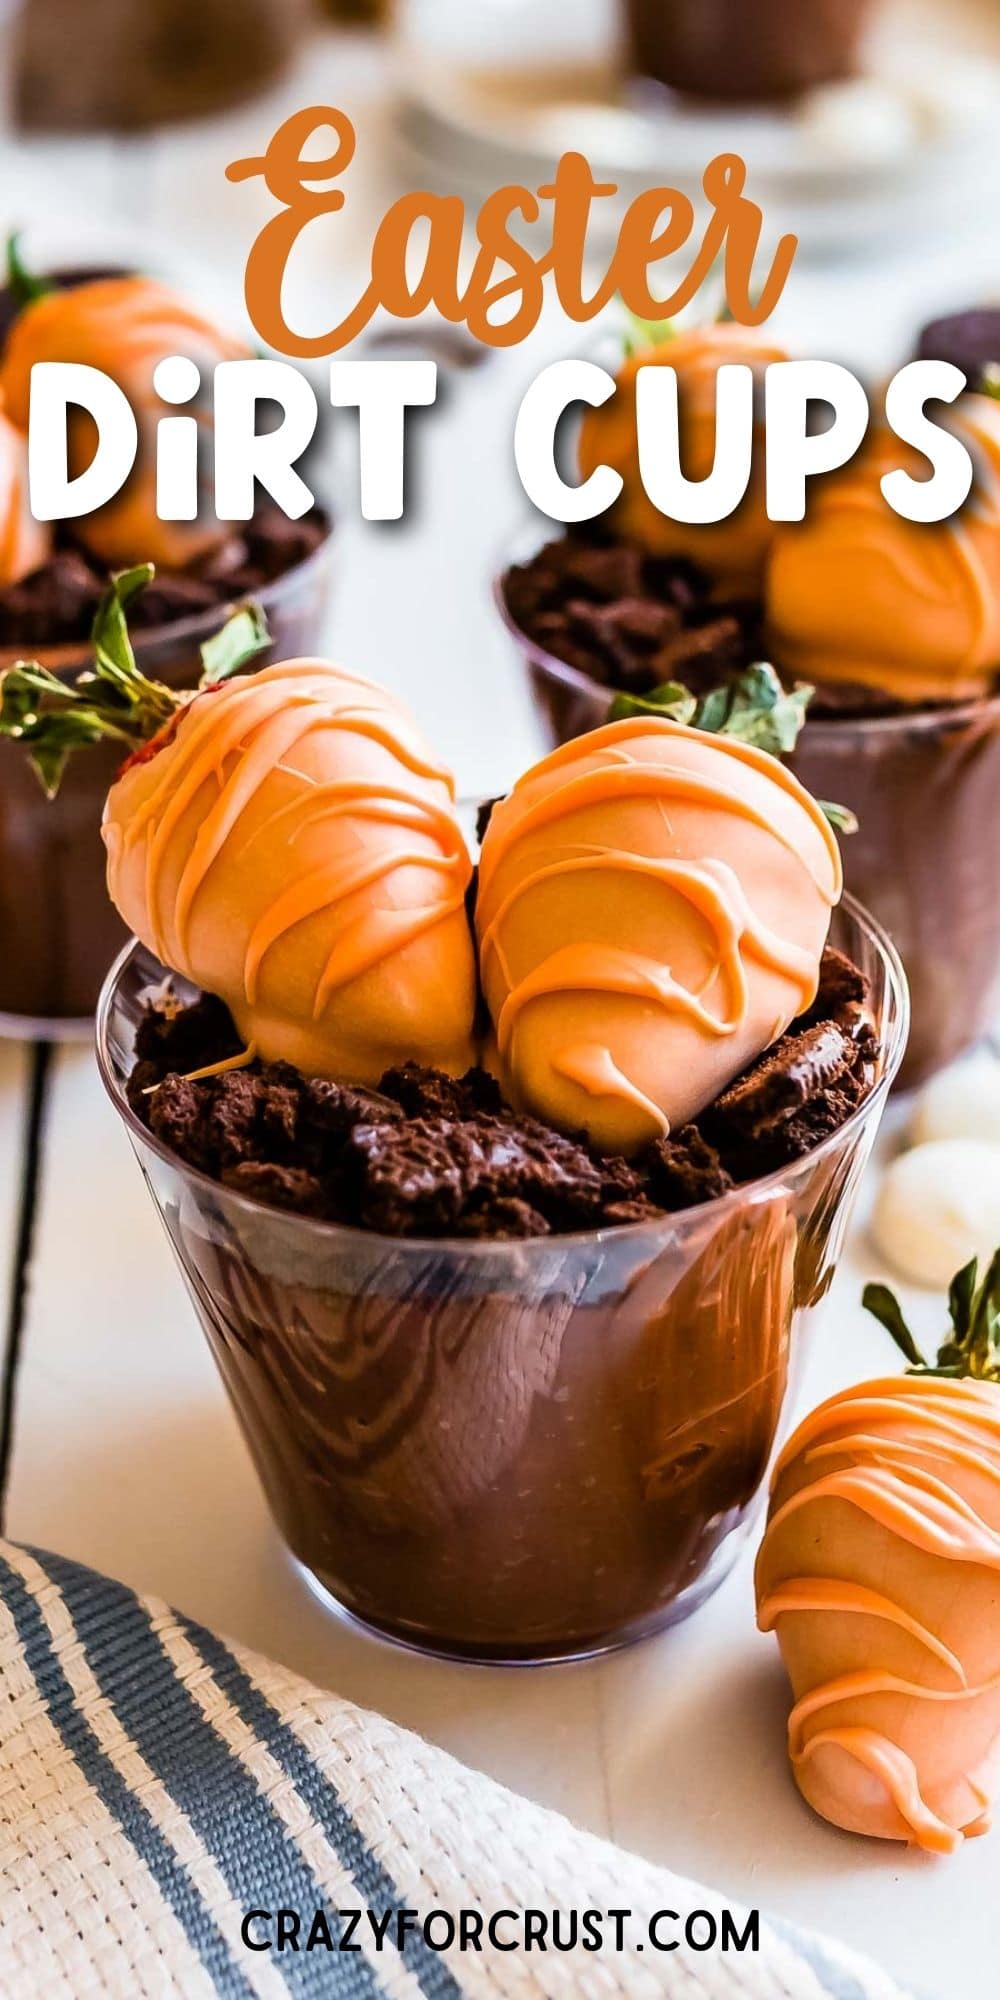 Easter dirt cups with chocolate covered strawberries on top with recipe title on top of image